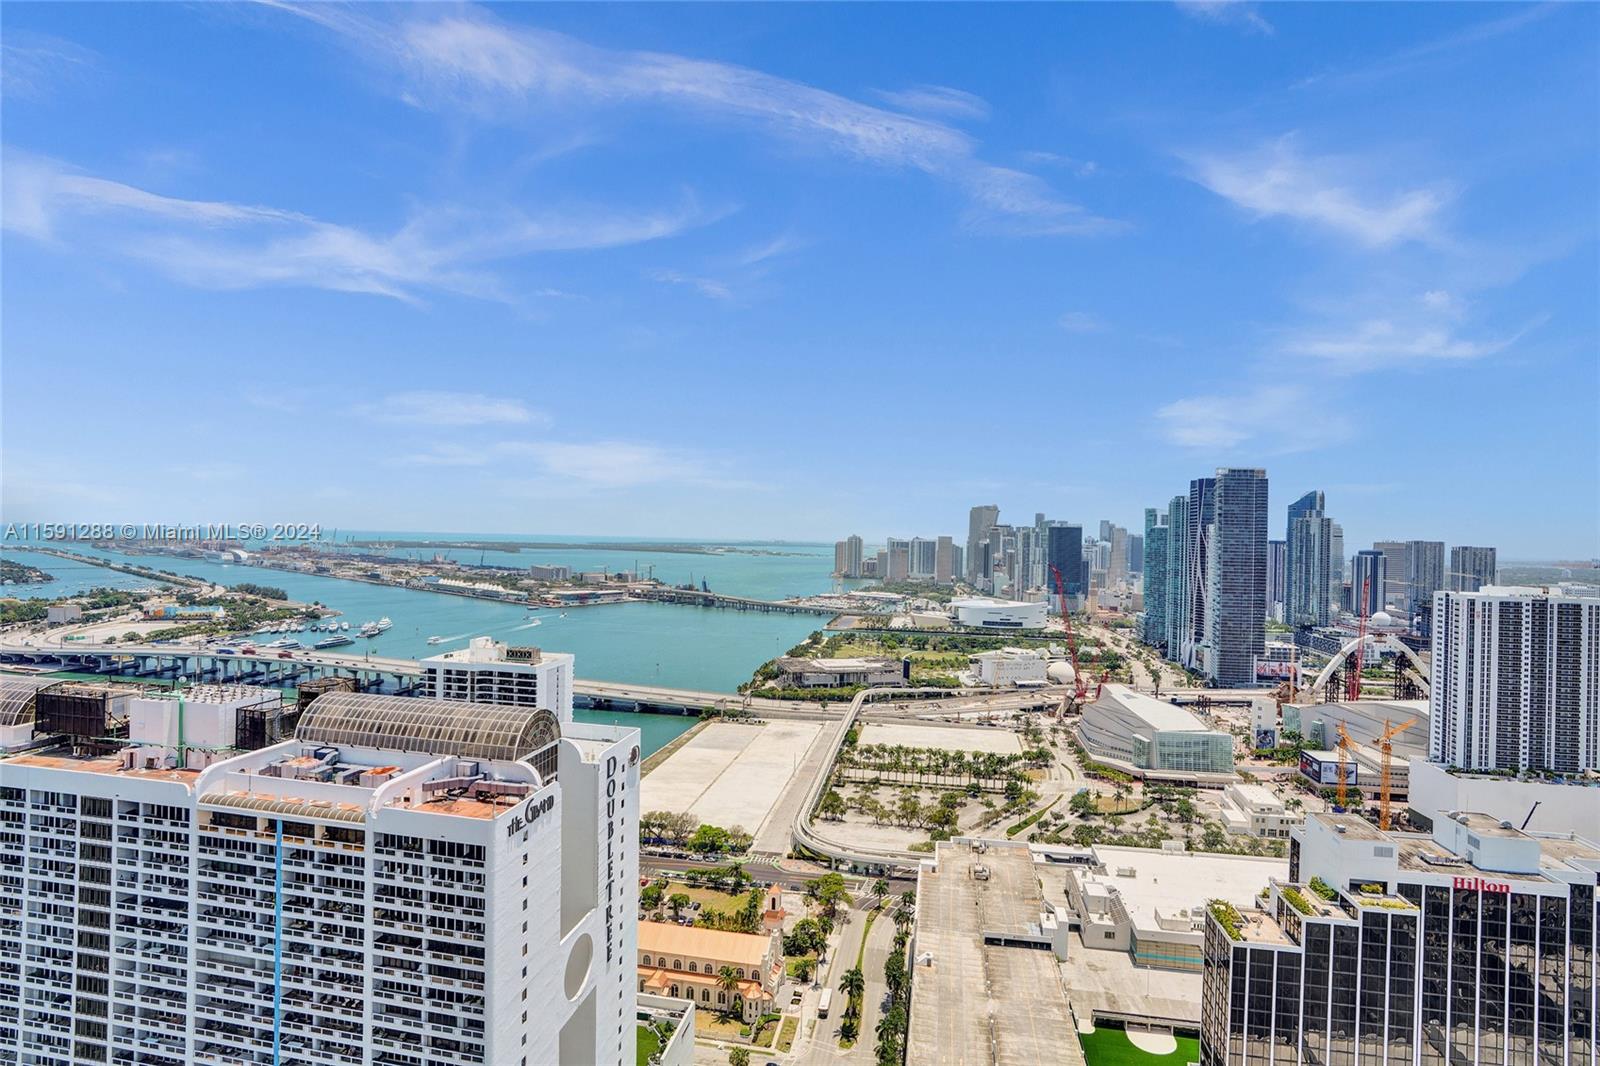 FURNISHED.Beautiful and modern 2 bed 2 bath condo close to the top of the Opera Tower. 51st floor with stunning views of the ocean,Port of Miami, Star Island. Close to Wynwood and Bayside. Great amenities that include a gym, pool, business center, valet parking, and mini convenience store in the lobby. 

Please allow 24 hours to show.
660 minimum credit score. Please provide proof of income and credit prior to showing.